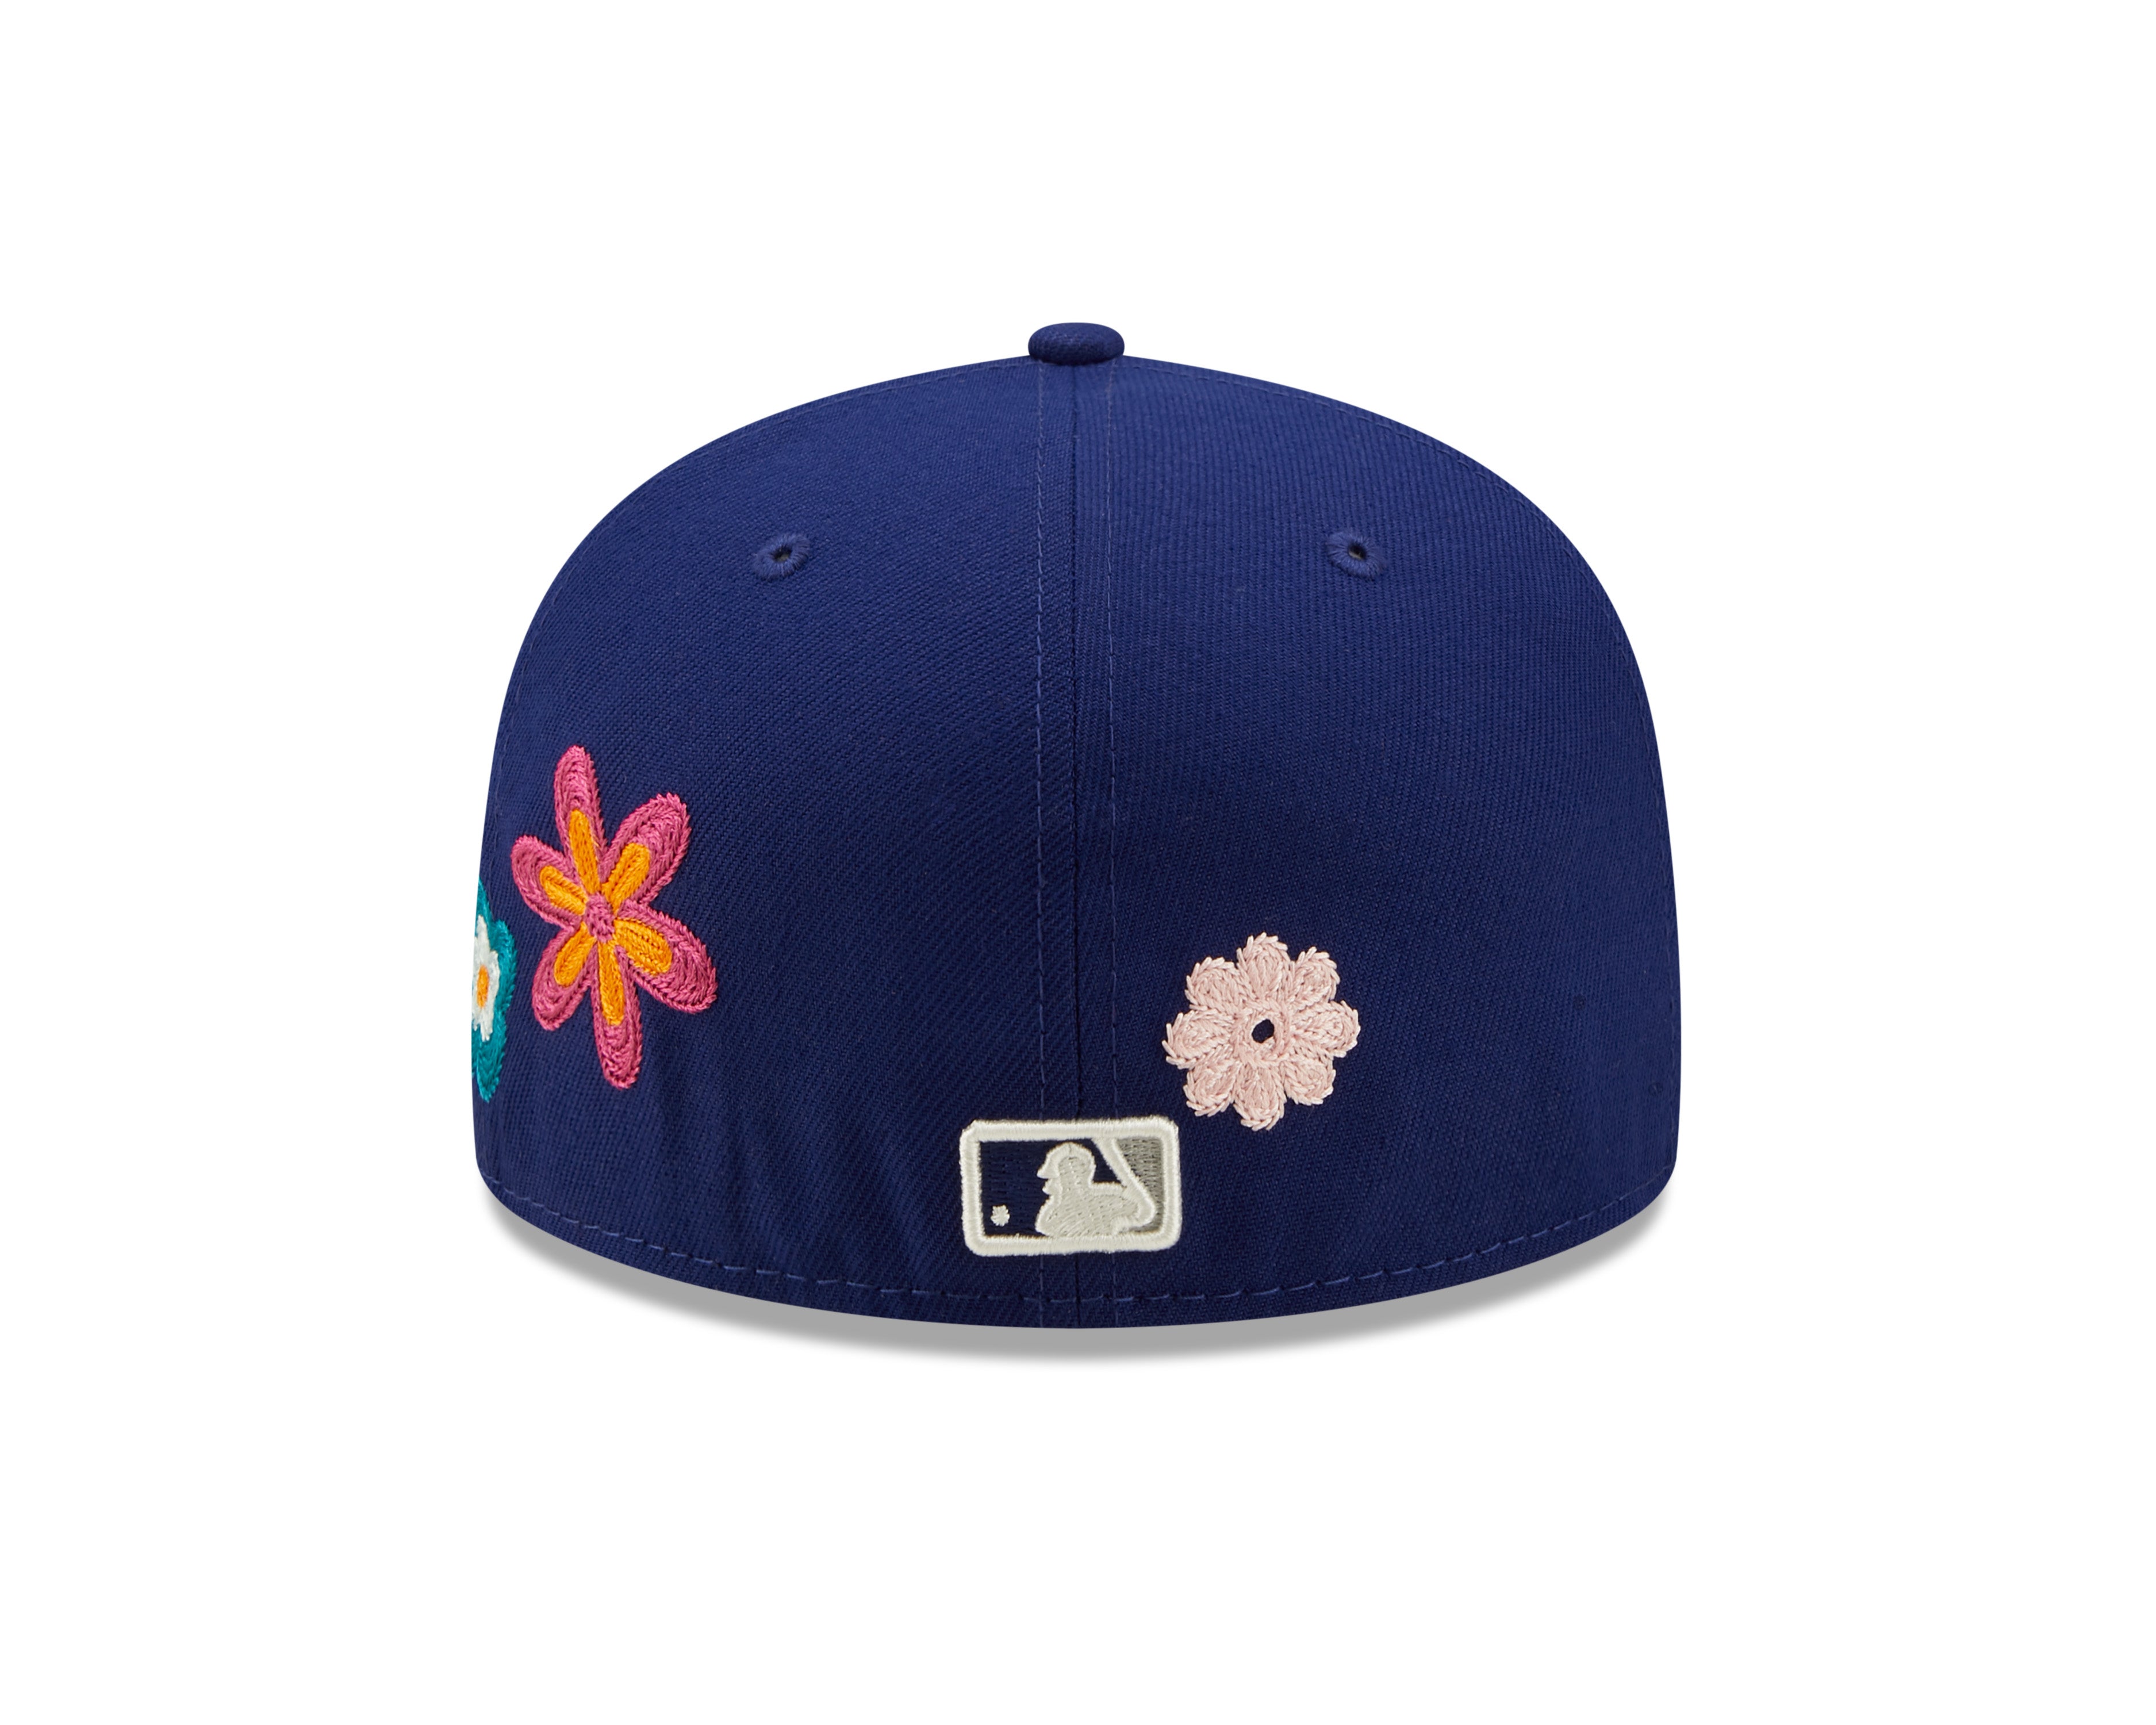 Los Angeles Dodgers 59fifty Fitted Cap MLB Floral - Blue - Headz Up 